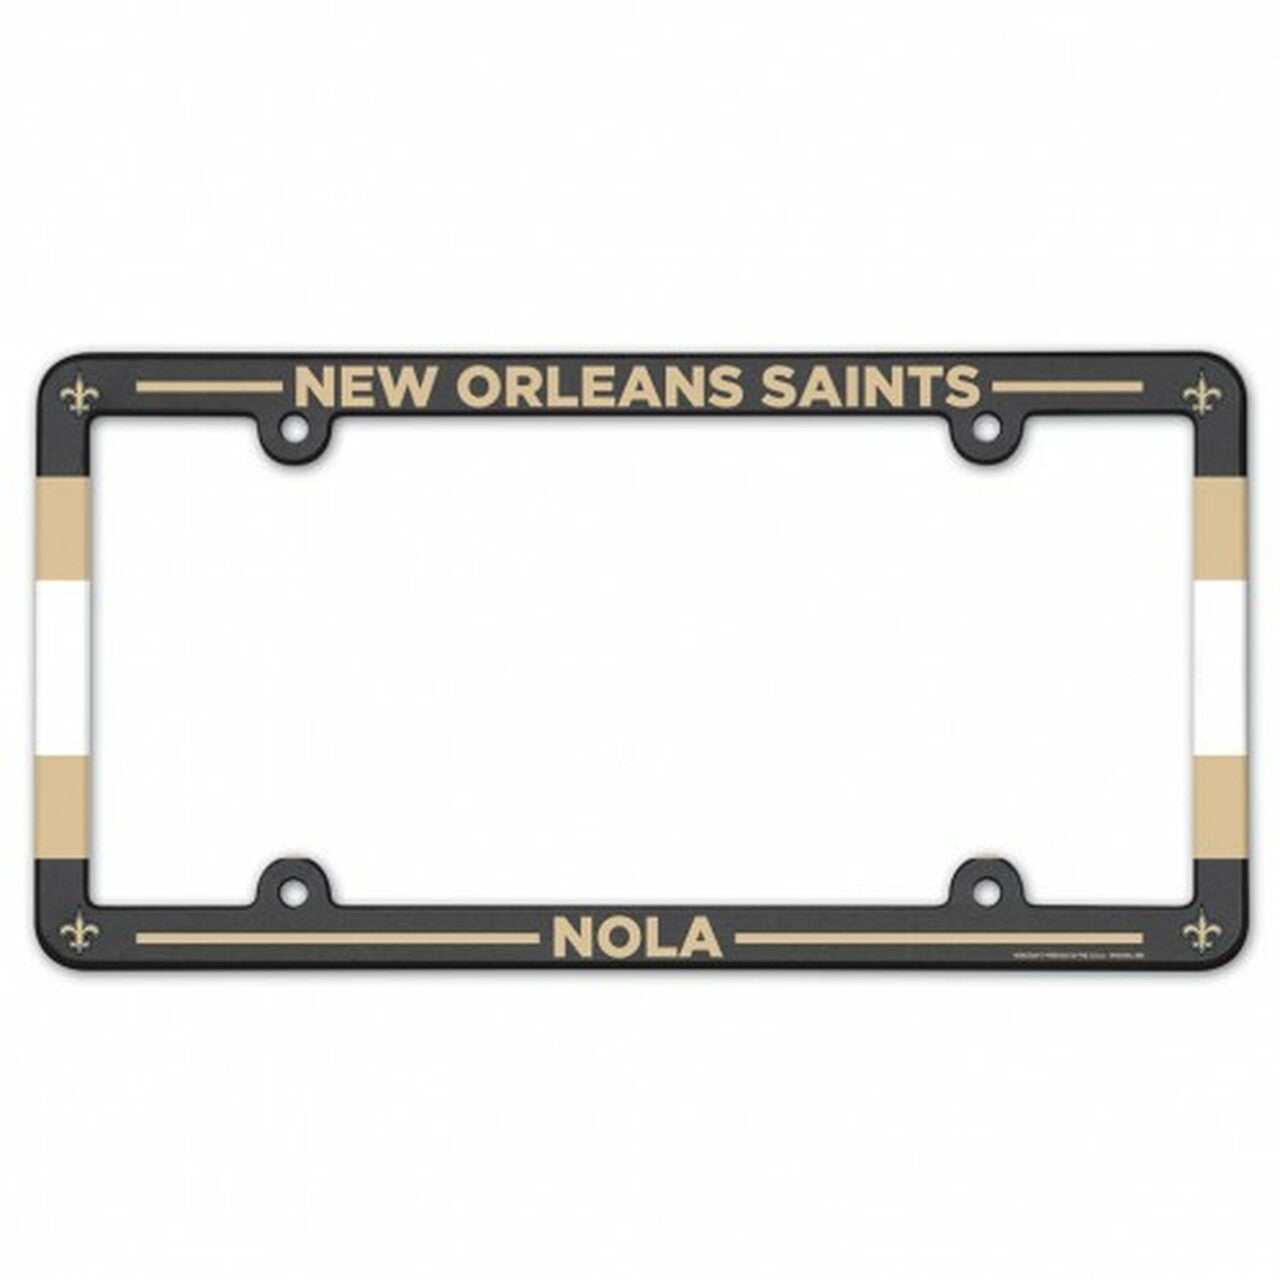 New Orleans Saints Full Color Plastic License Plate Frame by Wincraft